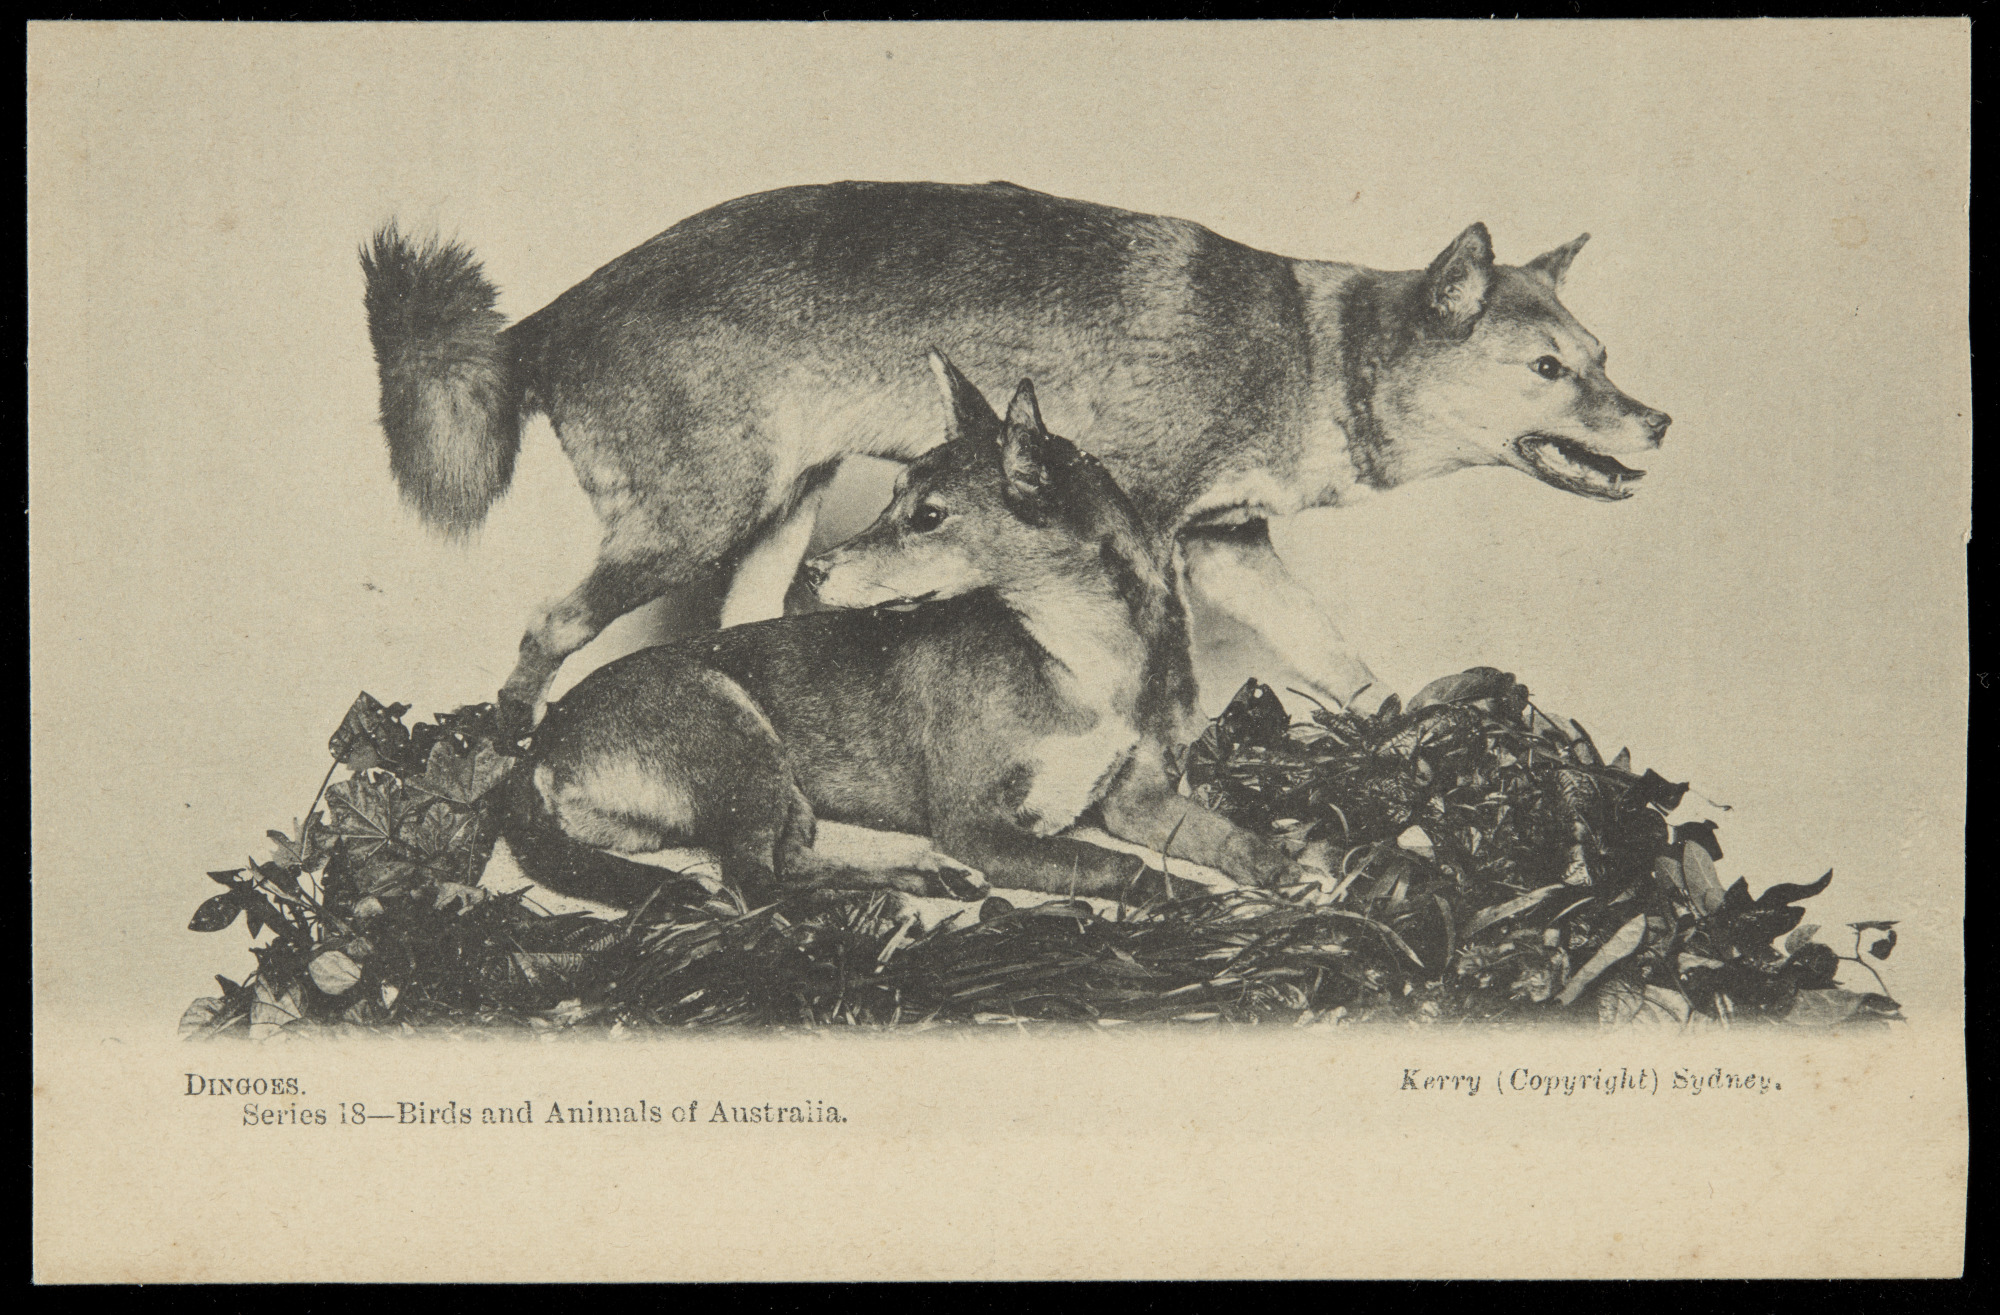 A postcard featuring a black and white photograph of two taxidermied dingoes